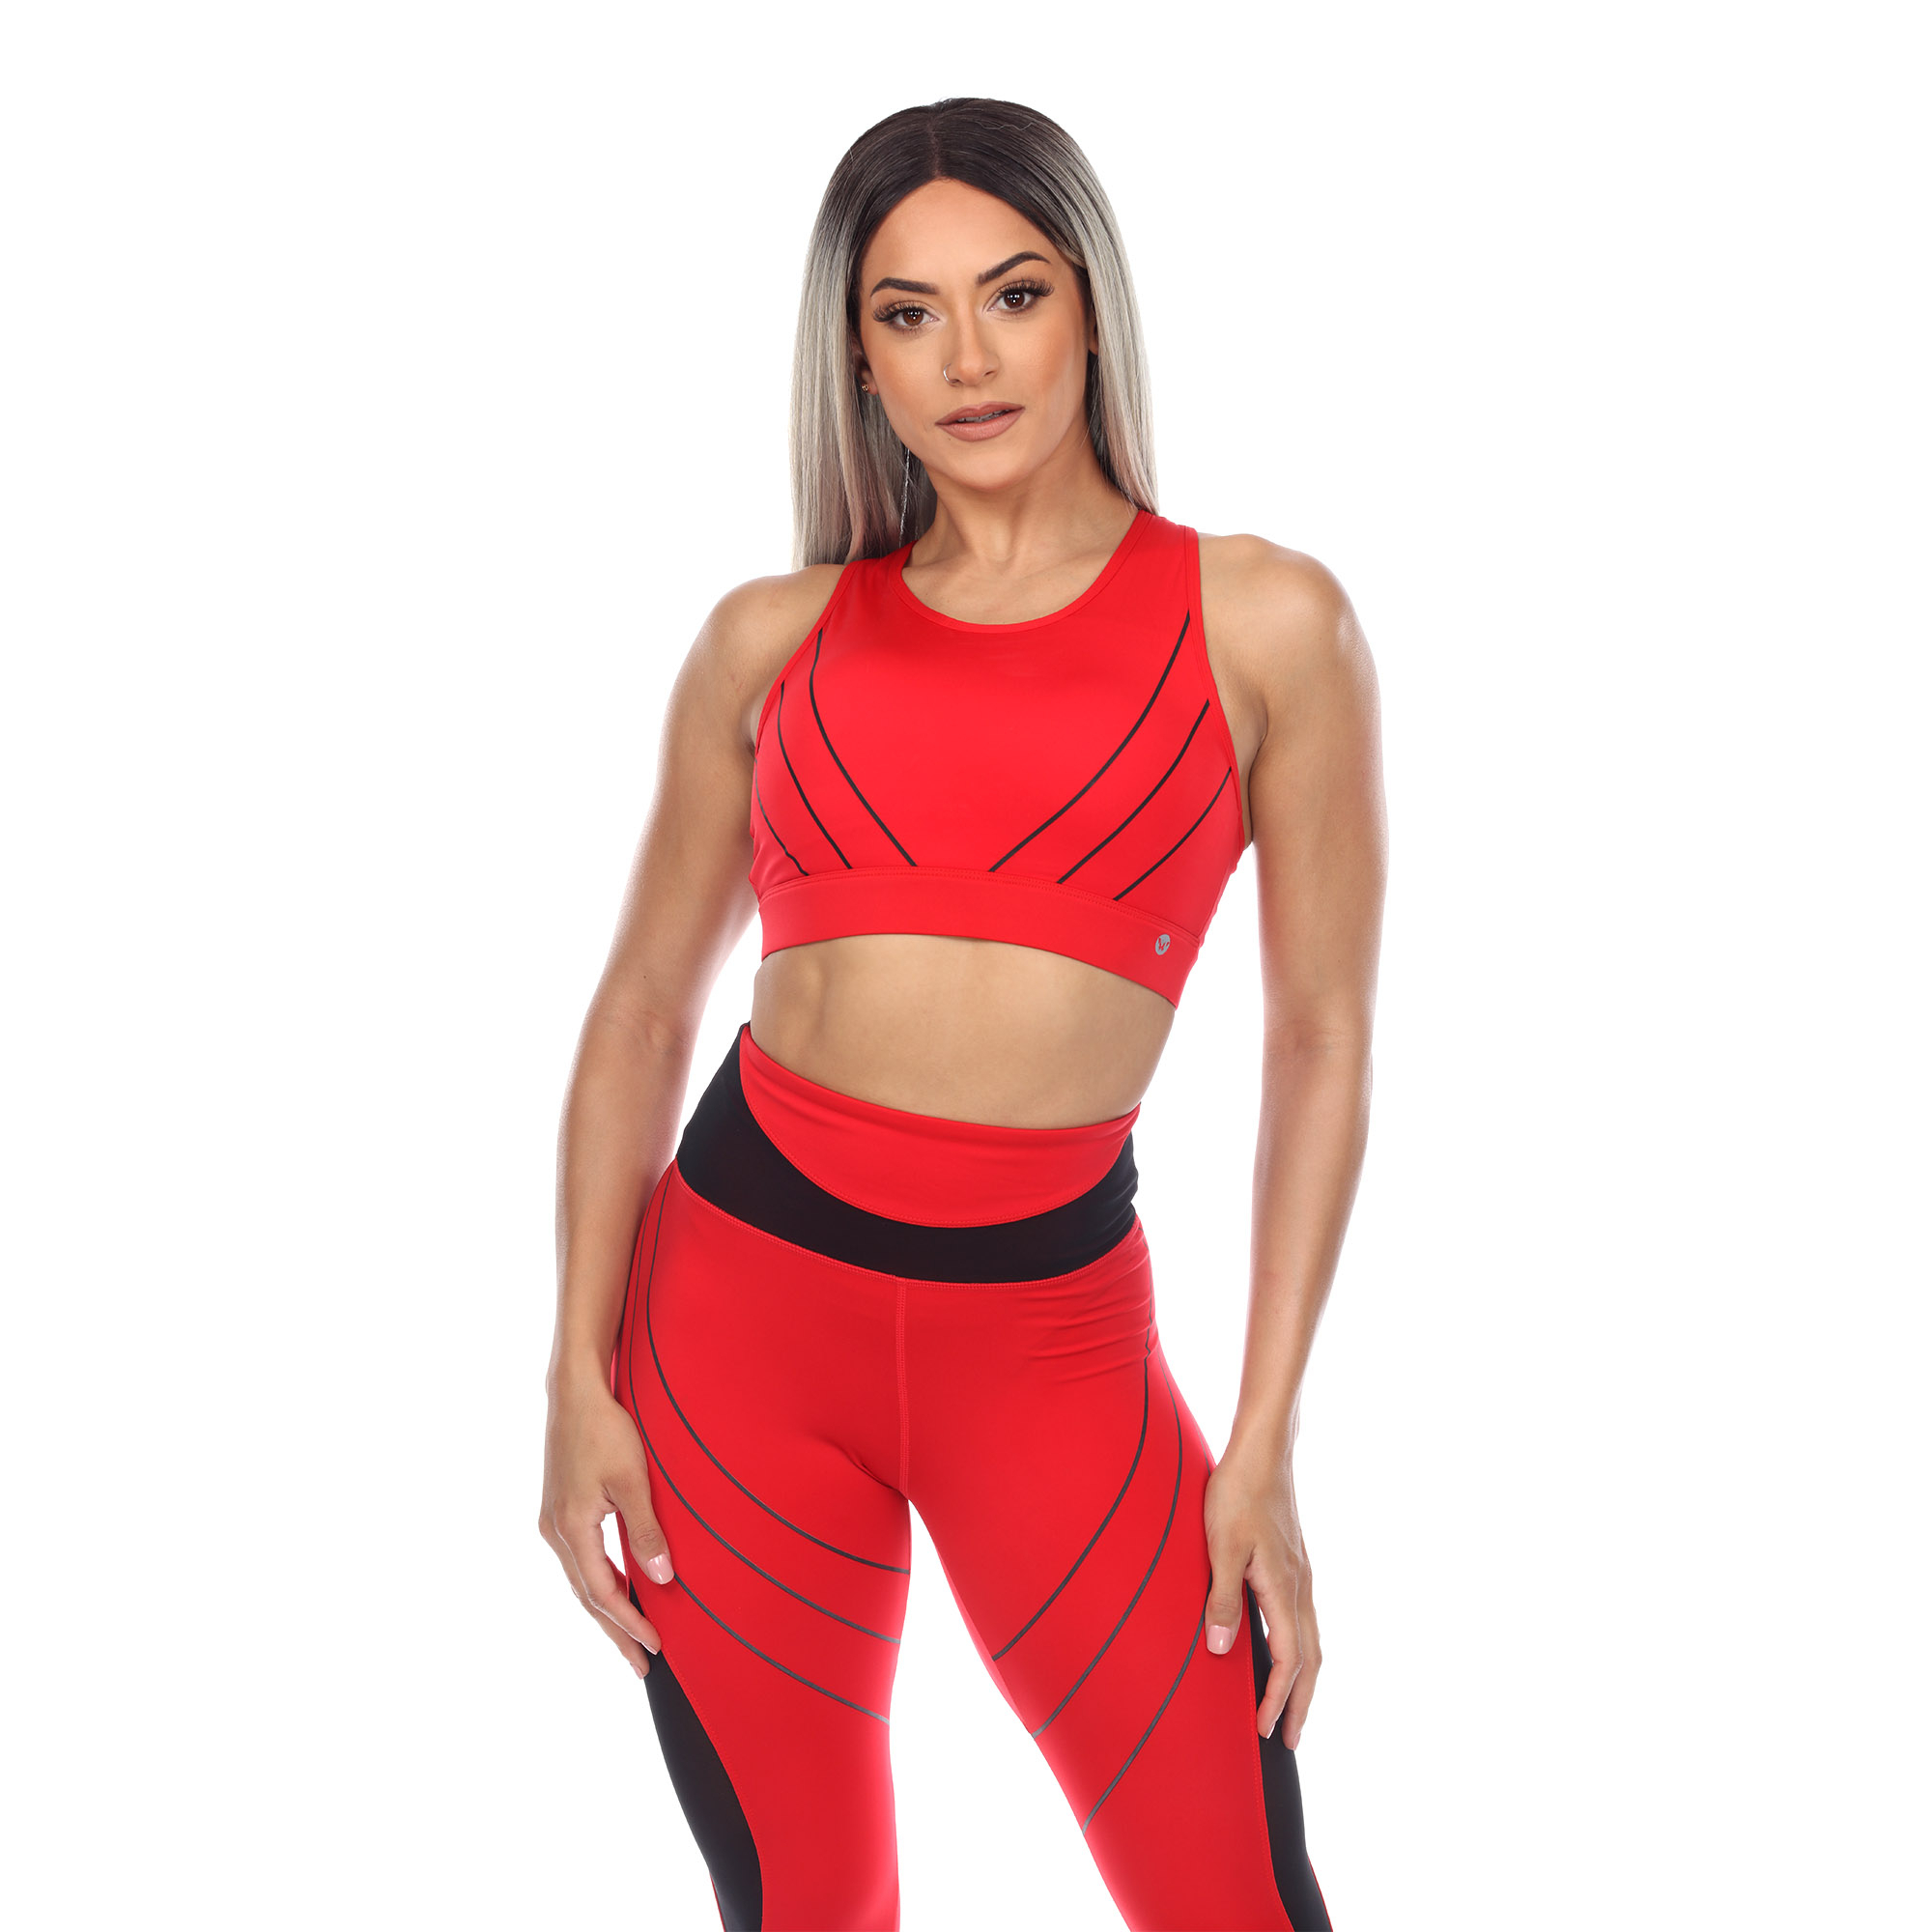 White Mark Women's Cut Out Back Mesh Sports Bra - Red, Large